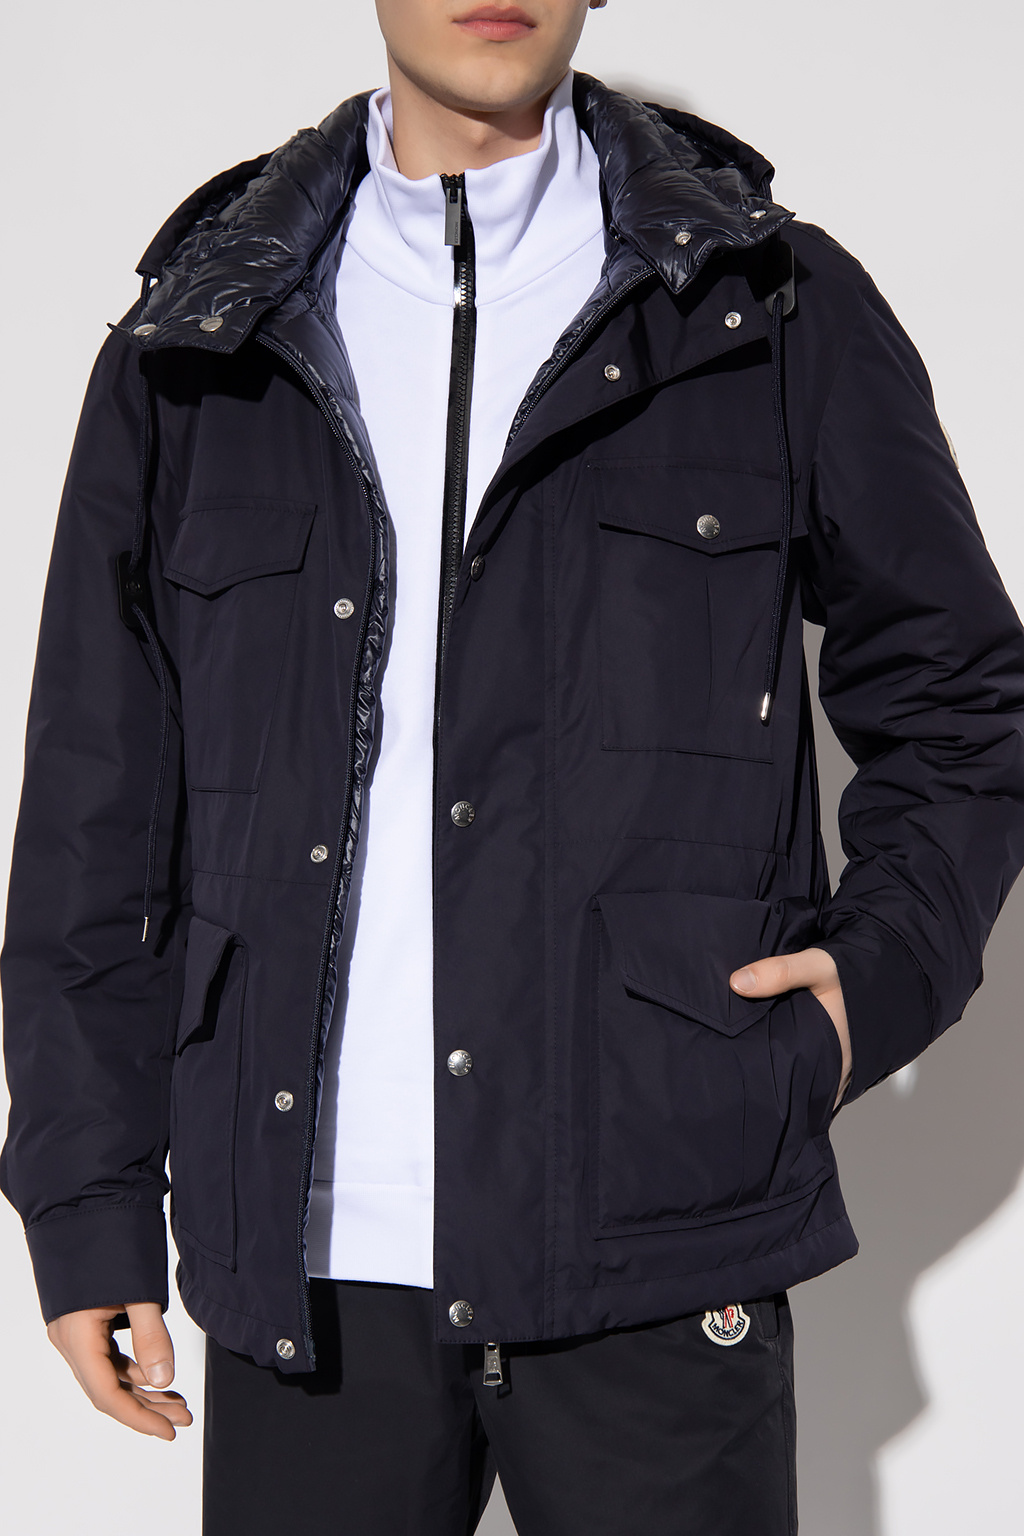 Moncler ‘Isidore’ reversible down jacket